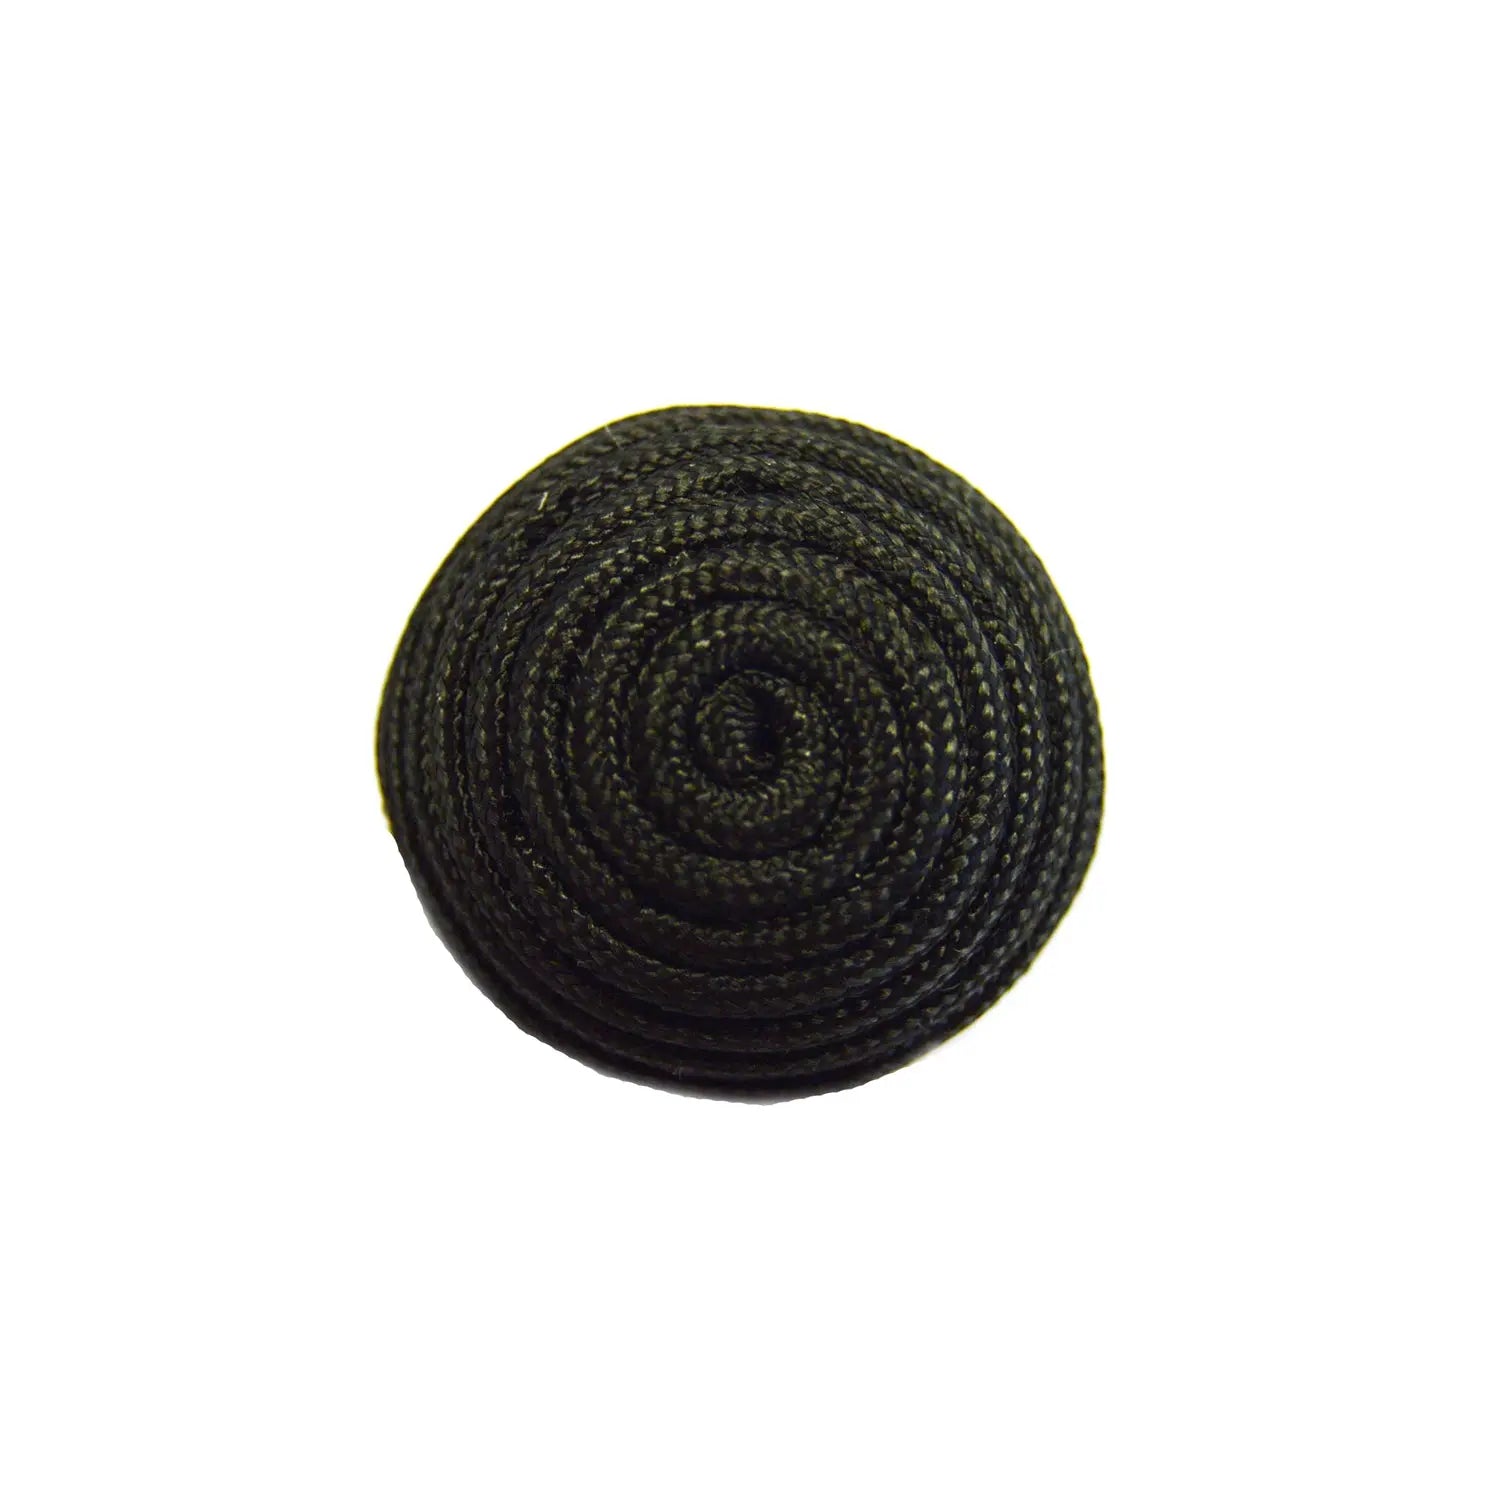 Small Black Cord Covered Button wyedean